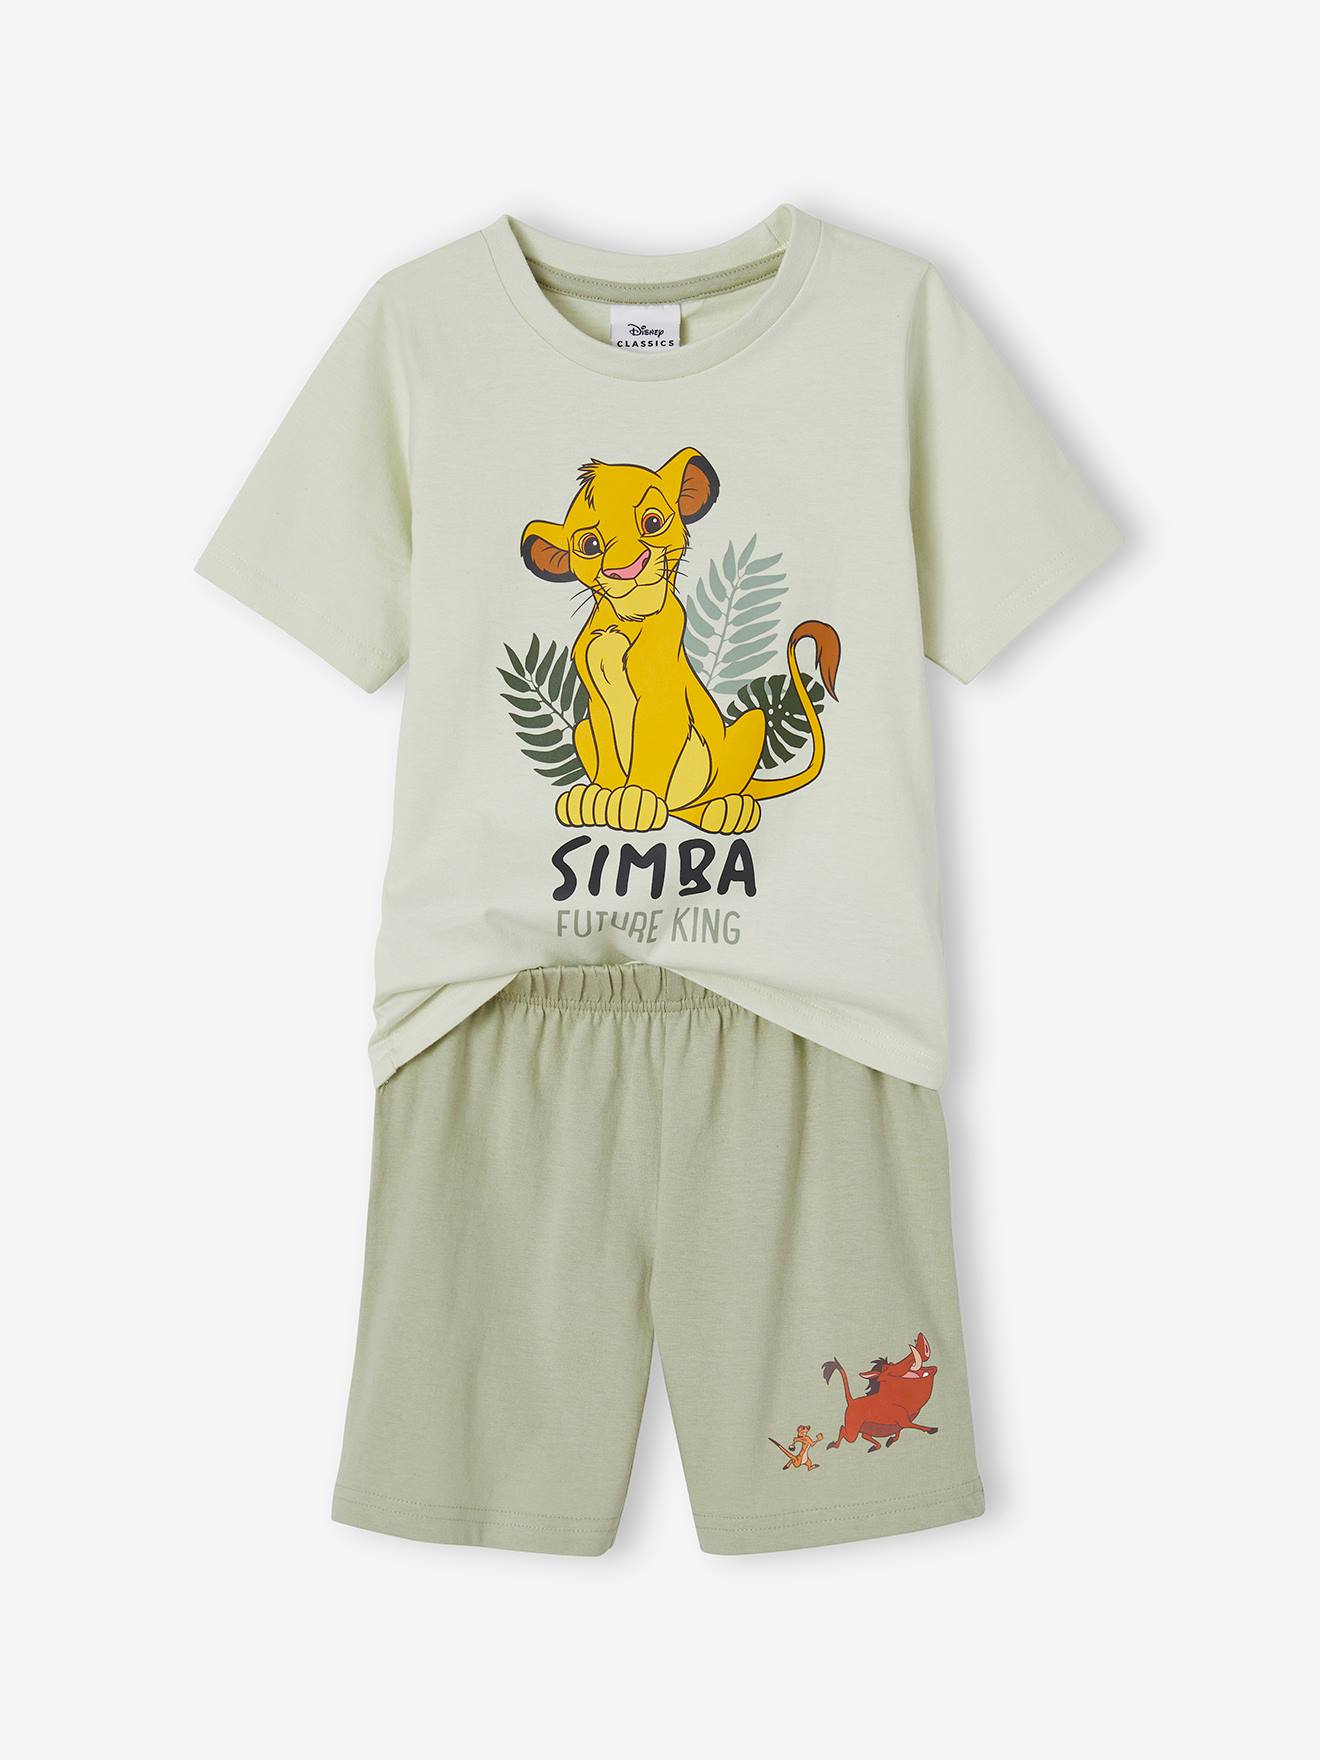 The Lion King Pyjamas by Disney(r) for Boys sage green